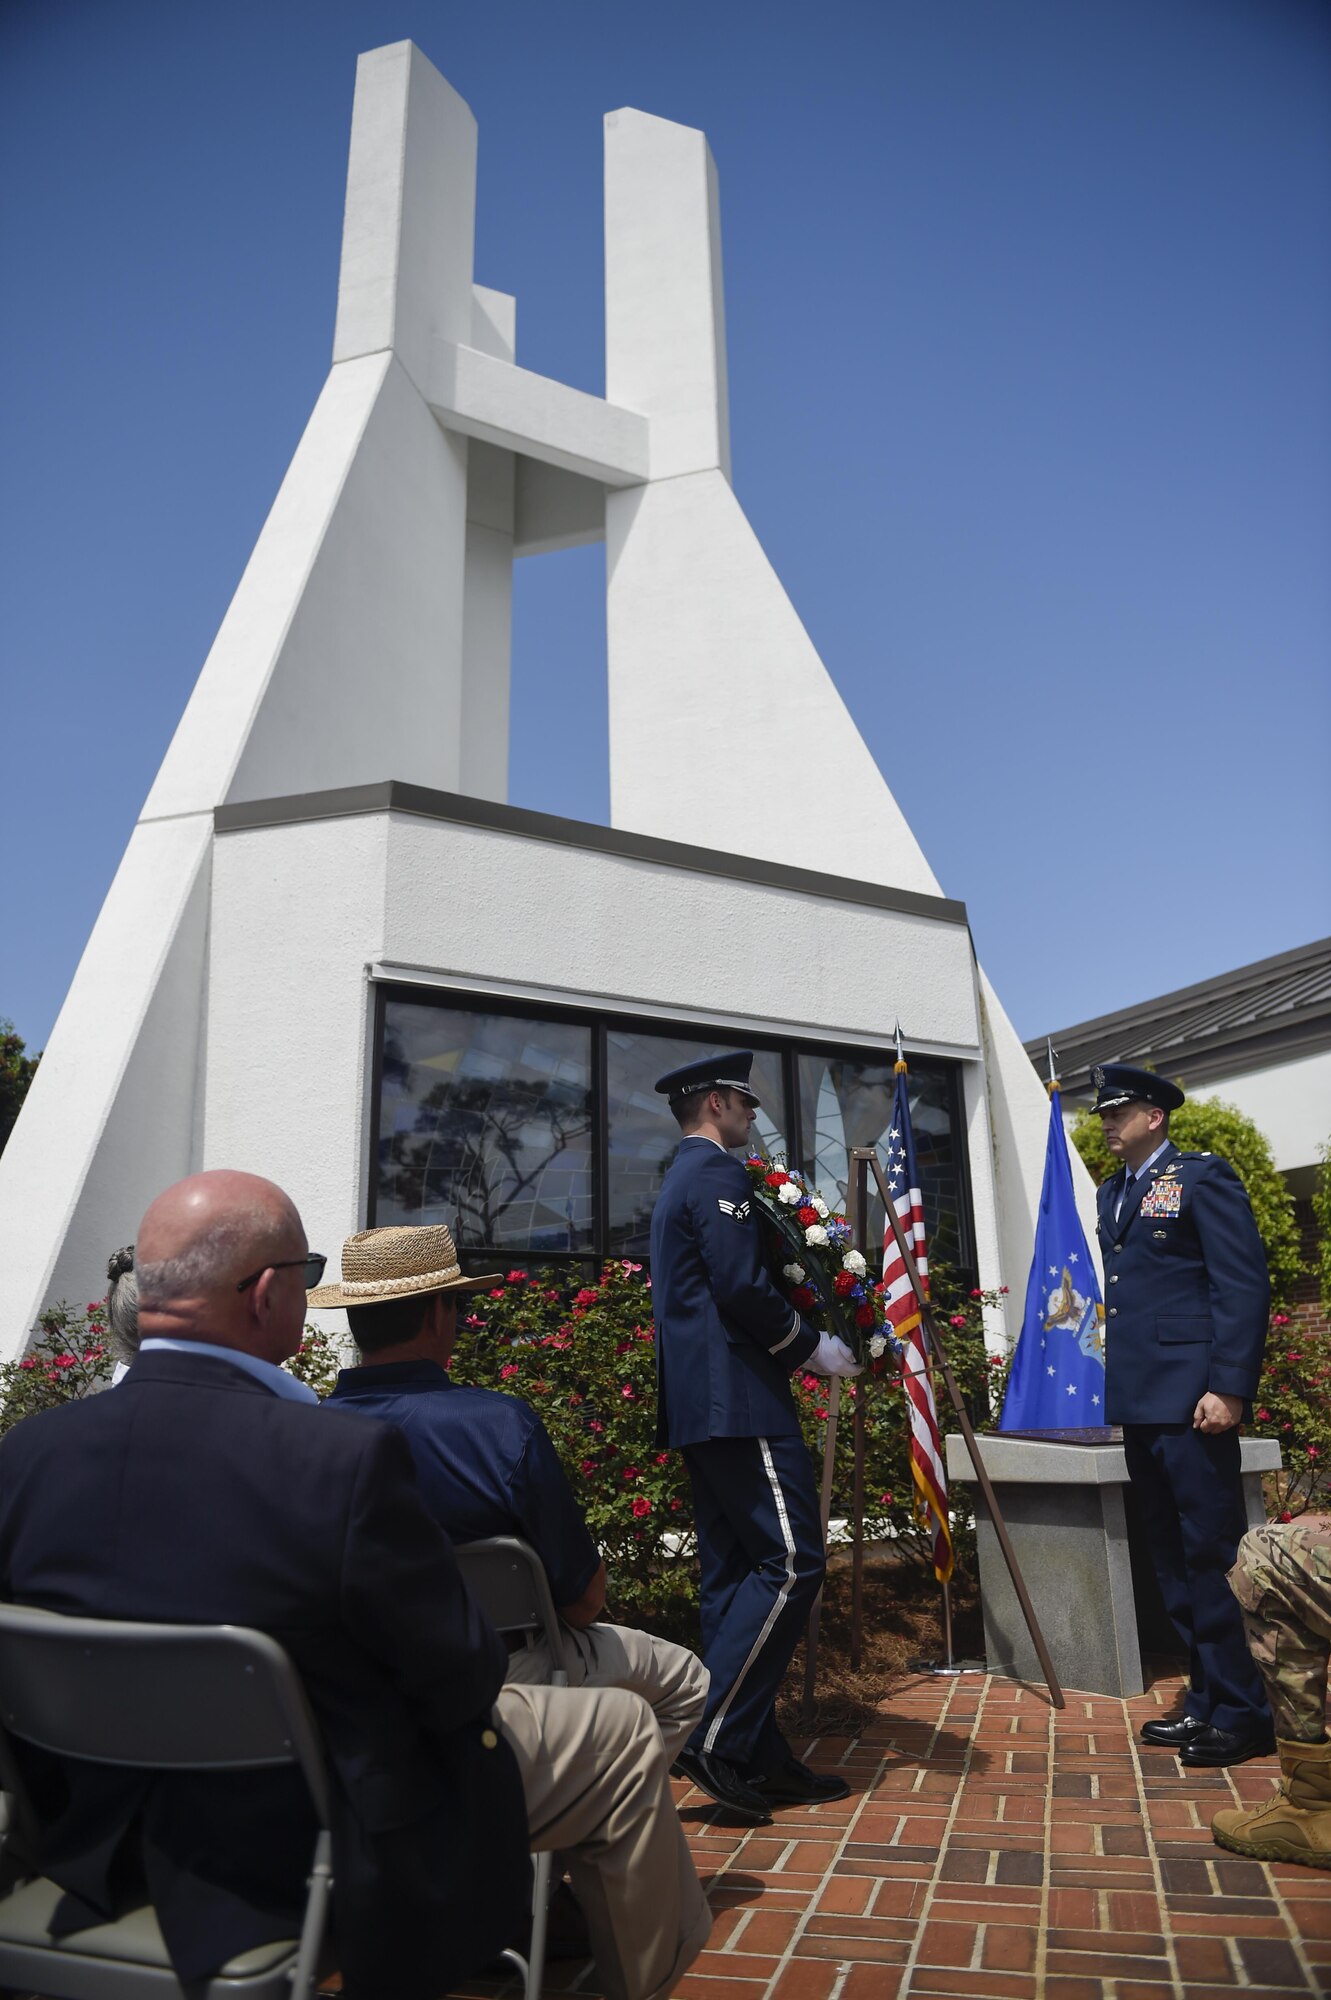 A Hurlburt Field Base Honor Guard member places a wreath during an Operation Eagle Claw memorial ceremony at Hurlburt Field, Fla., April 25, 2016. This year marks the 36th anniversary of the rescue mission in Tehran, Iran, April 24, 1980. The wreath honored Maj. Richard Bakke, Maj. Harold Lewis Jr., Tech. Sgt. Joel C. Mayo, Maj. Lyn McIntosh and Capt. Charles McMillan II, all from the 8th Special Operations Squadron, as well as Marine Sgt. John Harvey, Cpl. George Holmes Jr. and Staff Sgt. Dewey Johnson, who lost their lives during the operation. (U.S. Air Force photo Airman 1st Class Kai White)